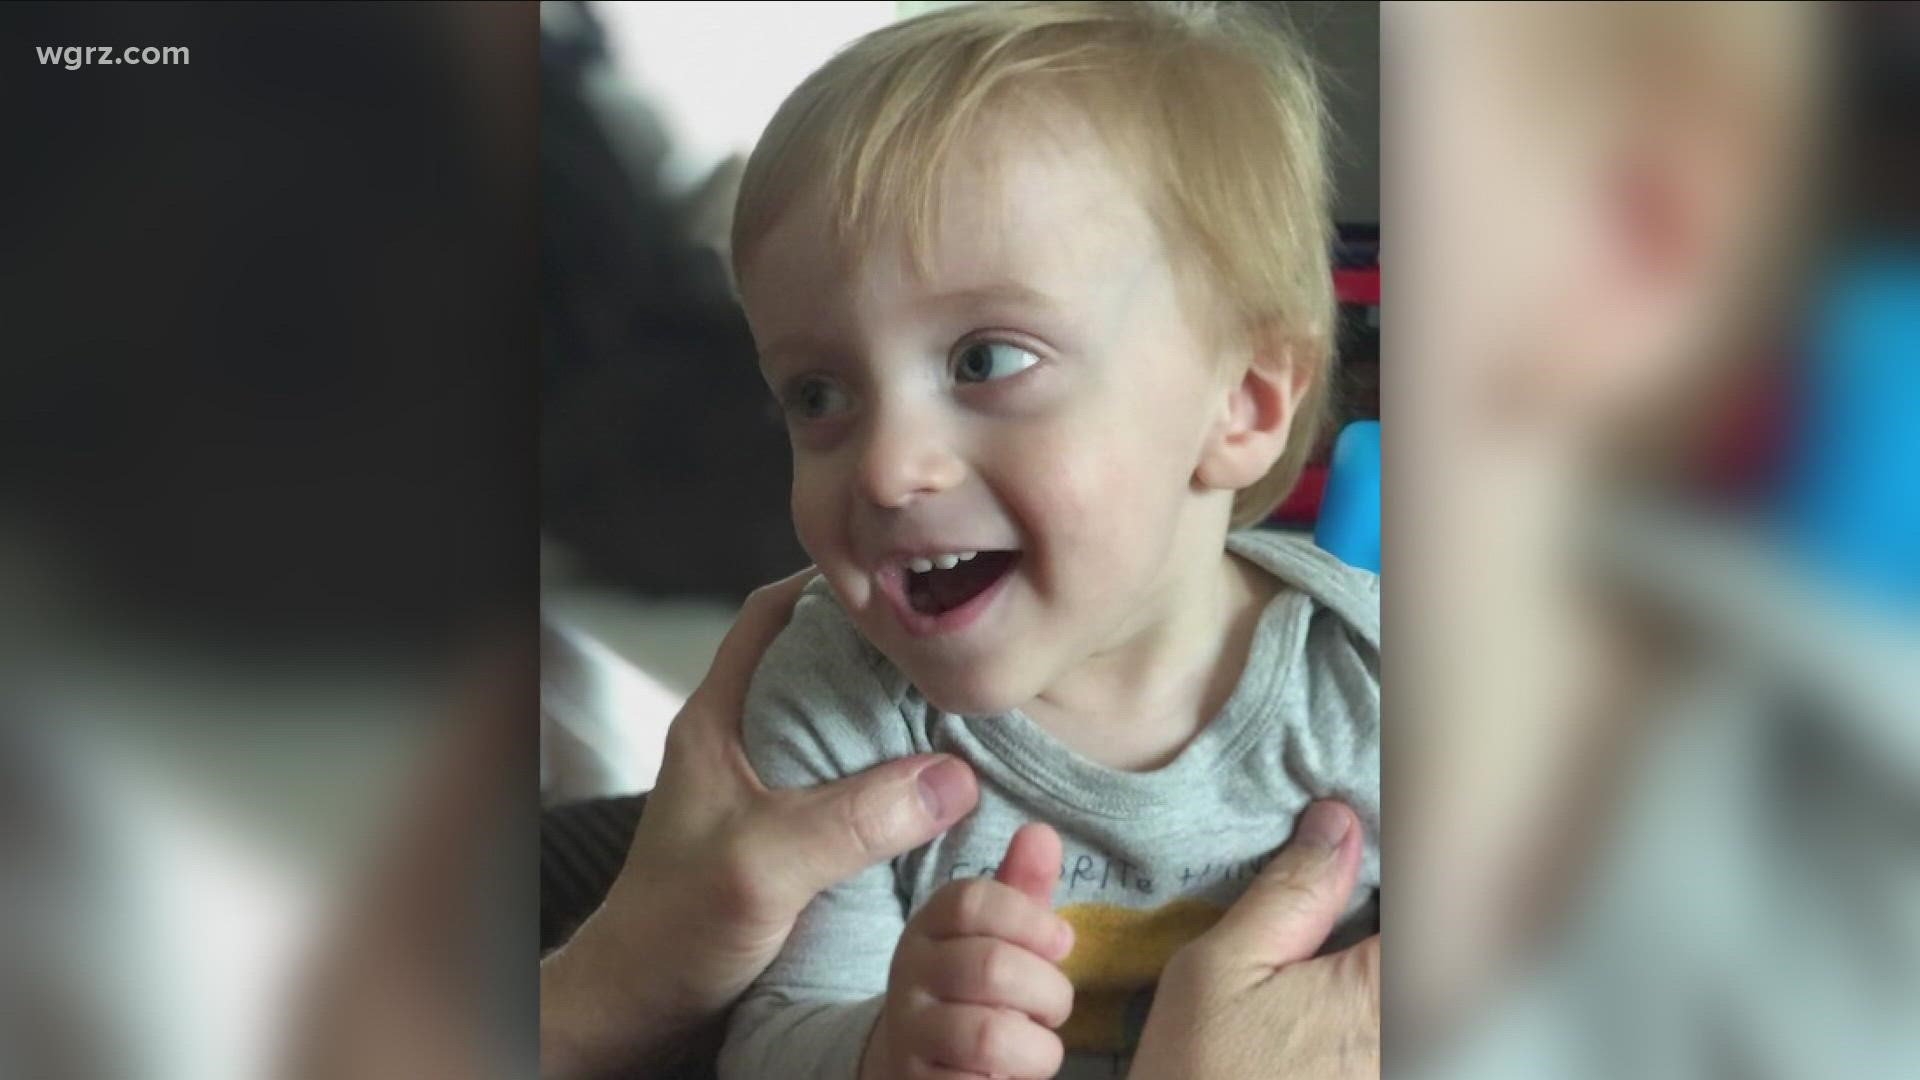 "Words really cannot do justice for the gratitude we feel for this donor," said Jack's mom Beth.